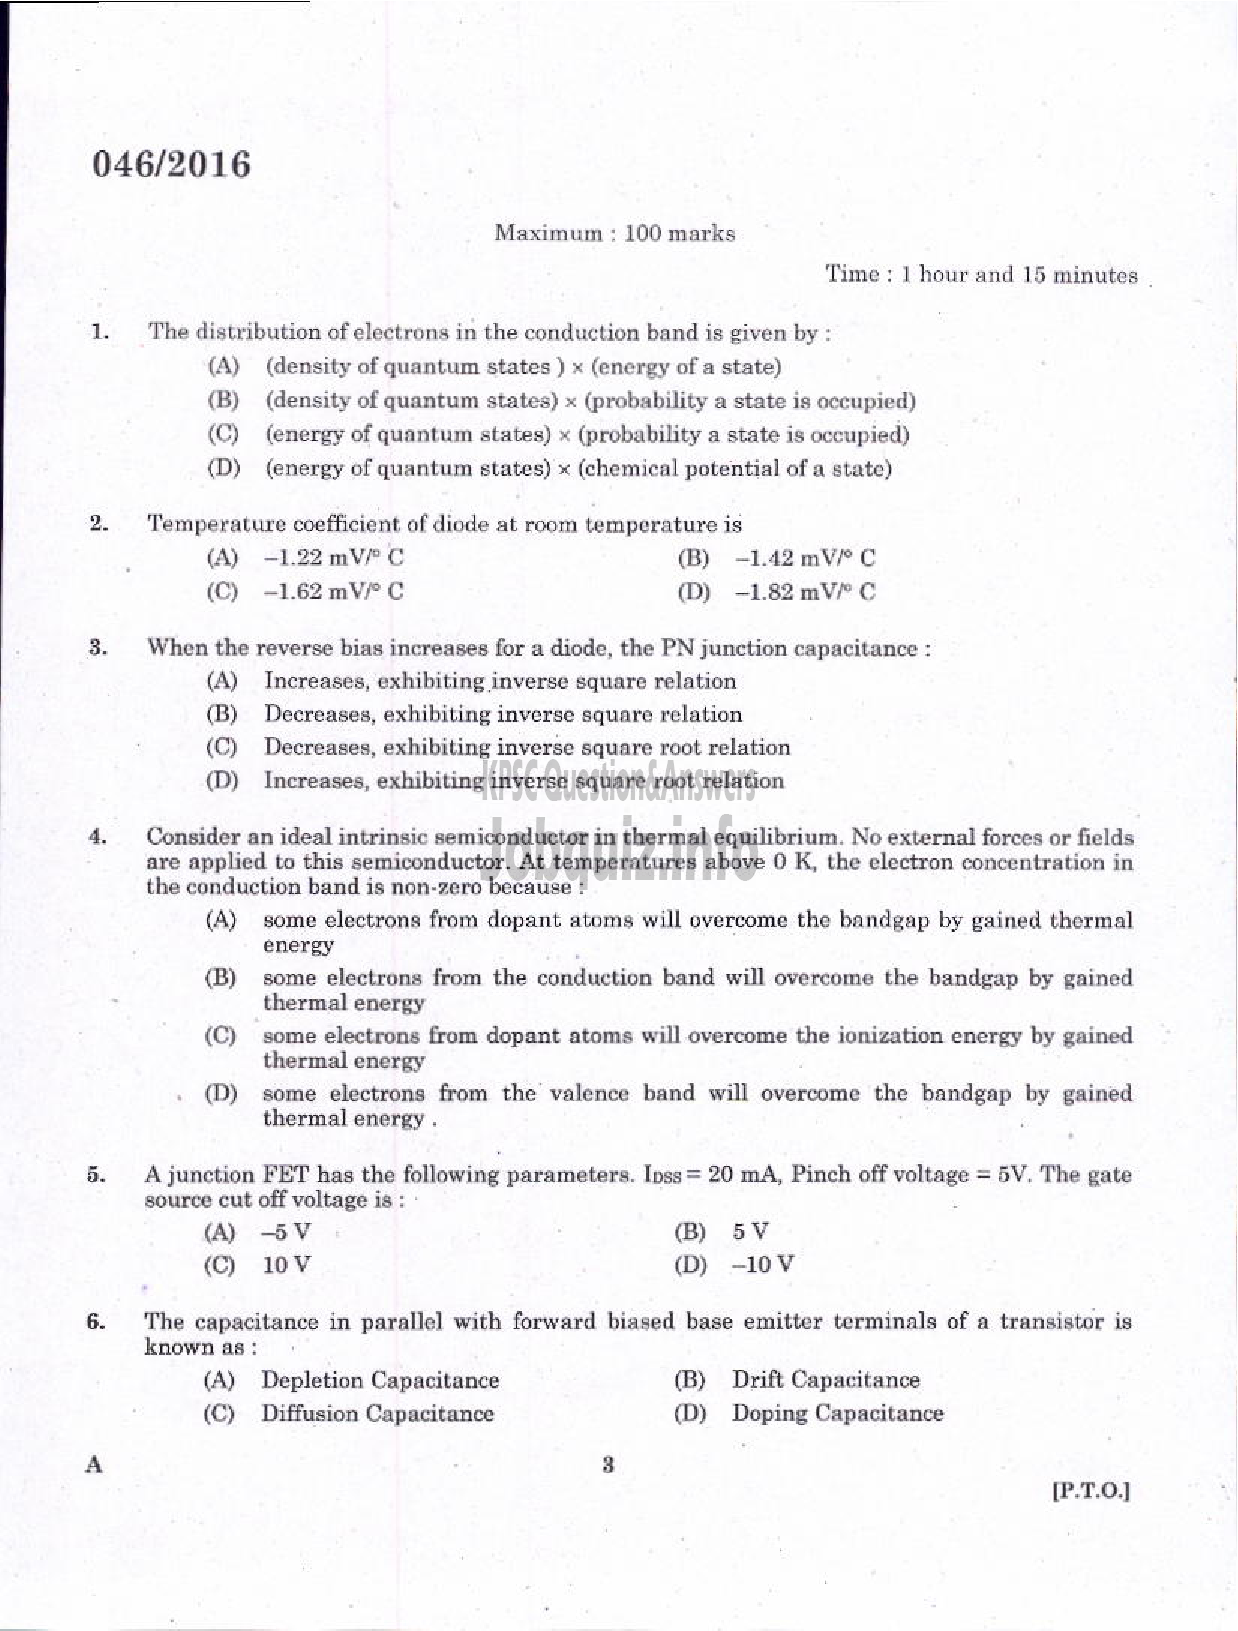 Kerala PSC Question Paper - VOCATIONAL TEACHER MAINTENANCE AND REPAIRS OF RADIO AND TELEVISION-1